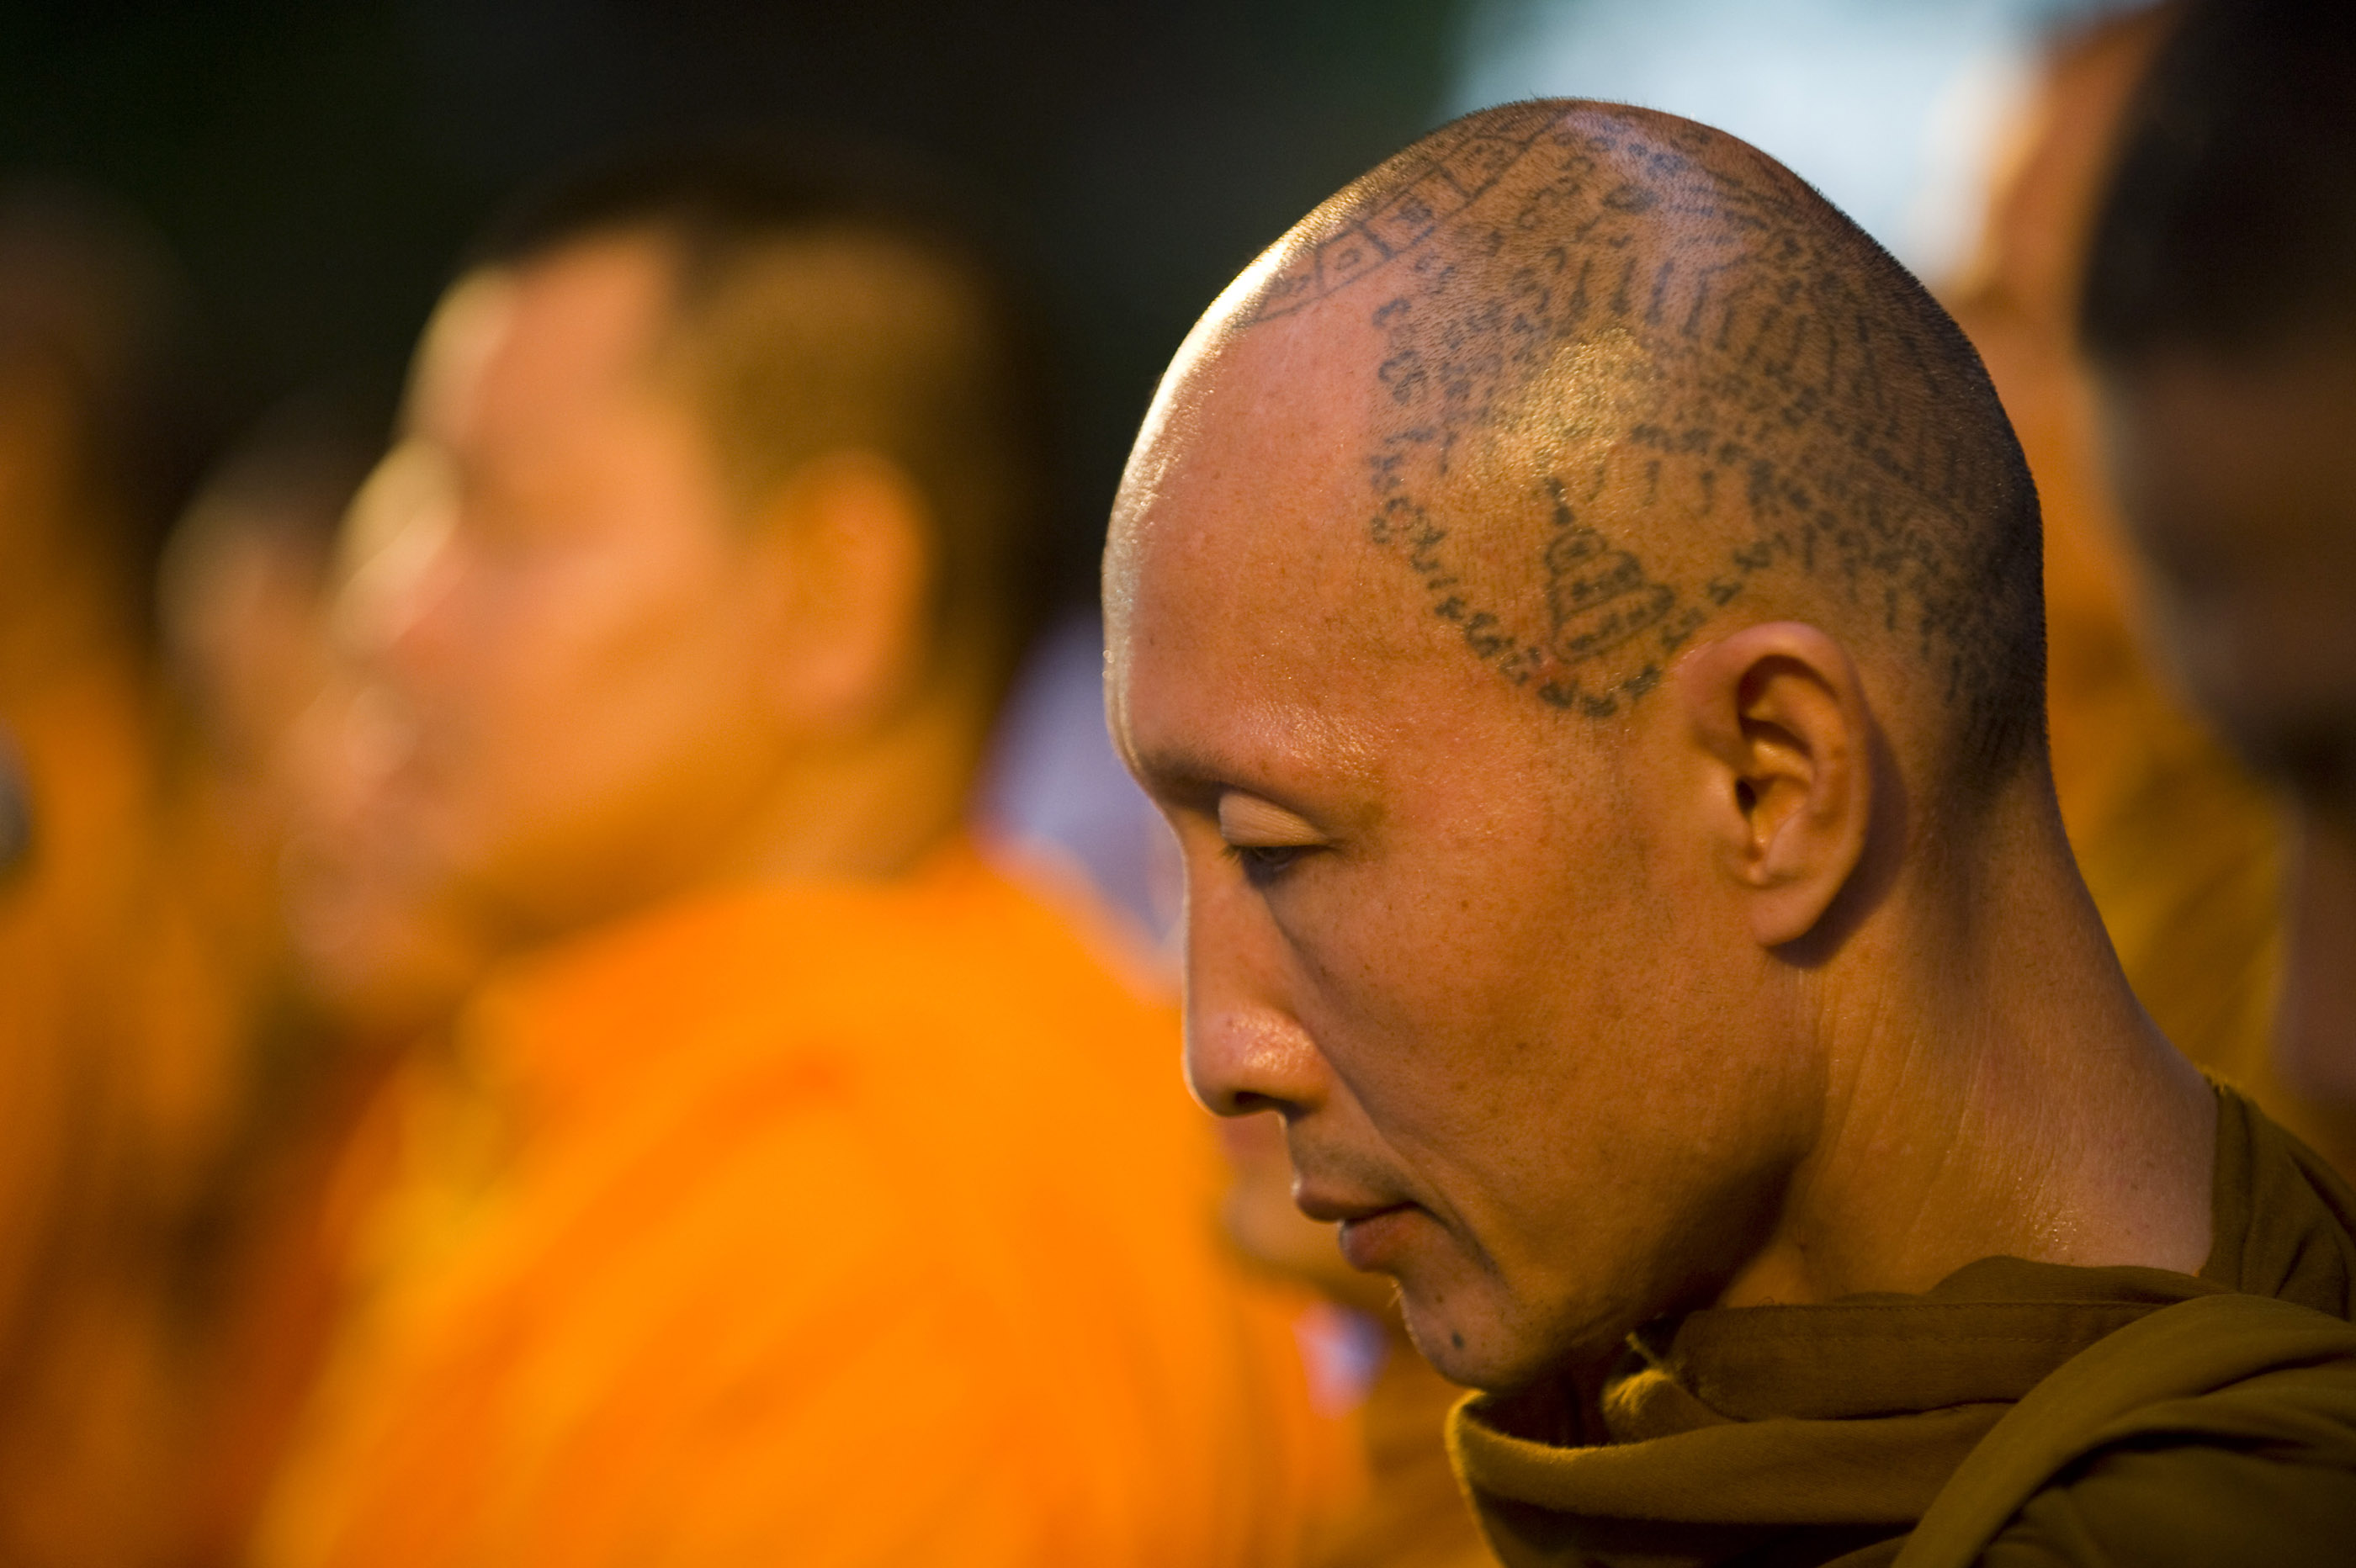 Monks pray while visiting the protest site.